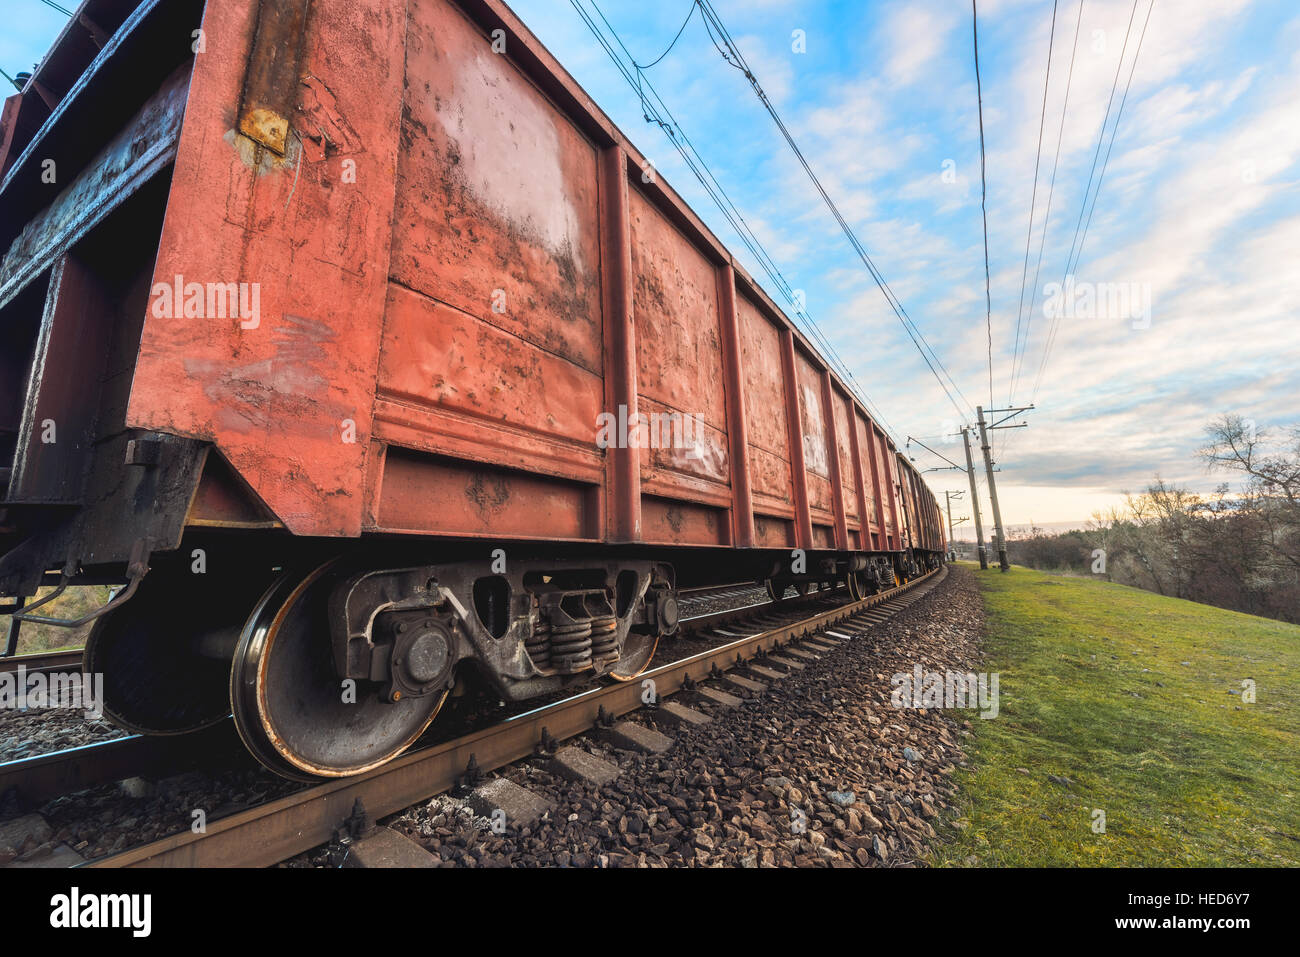 Railway station with cargo wagons and train against beautiful cloudy sky at sunset. Colorful industrial landscape. Railroad Stock Photo